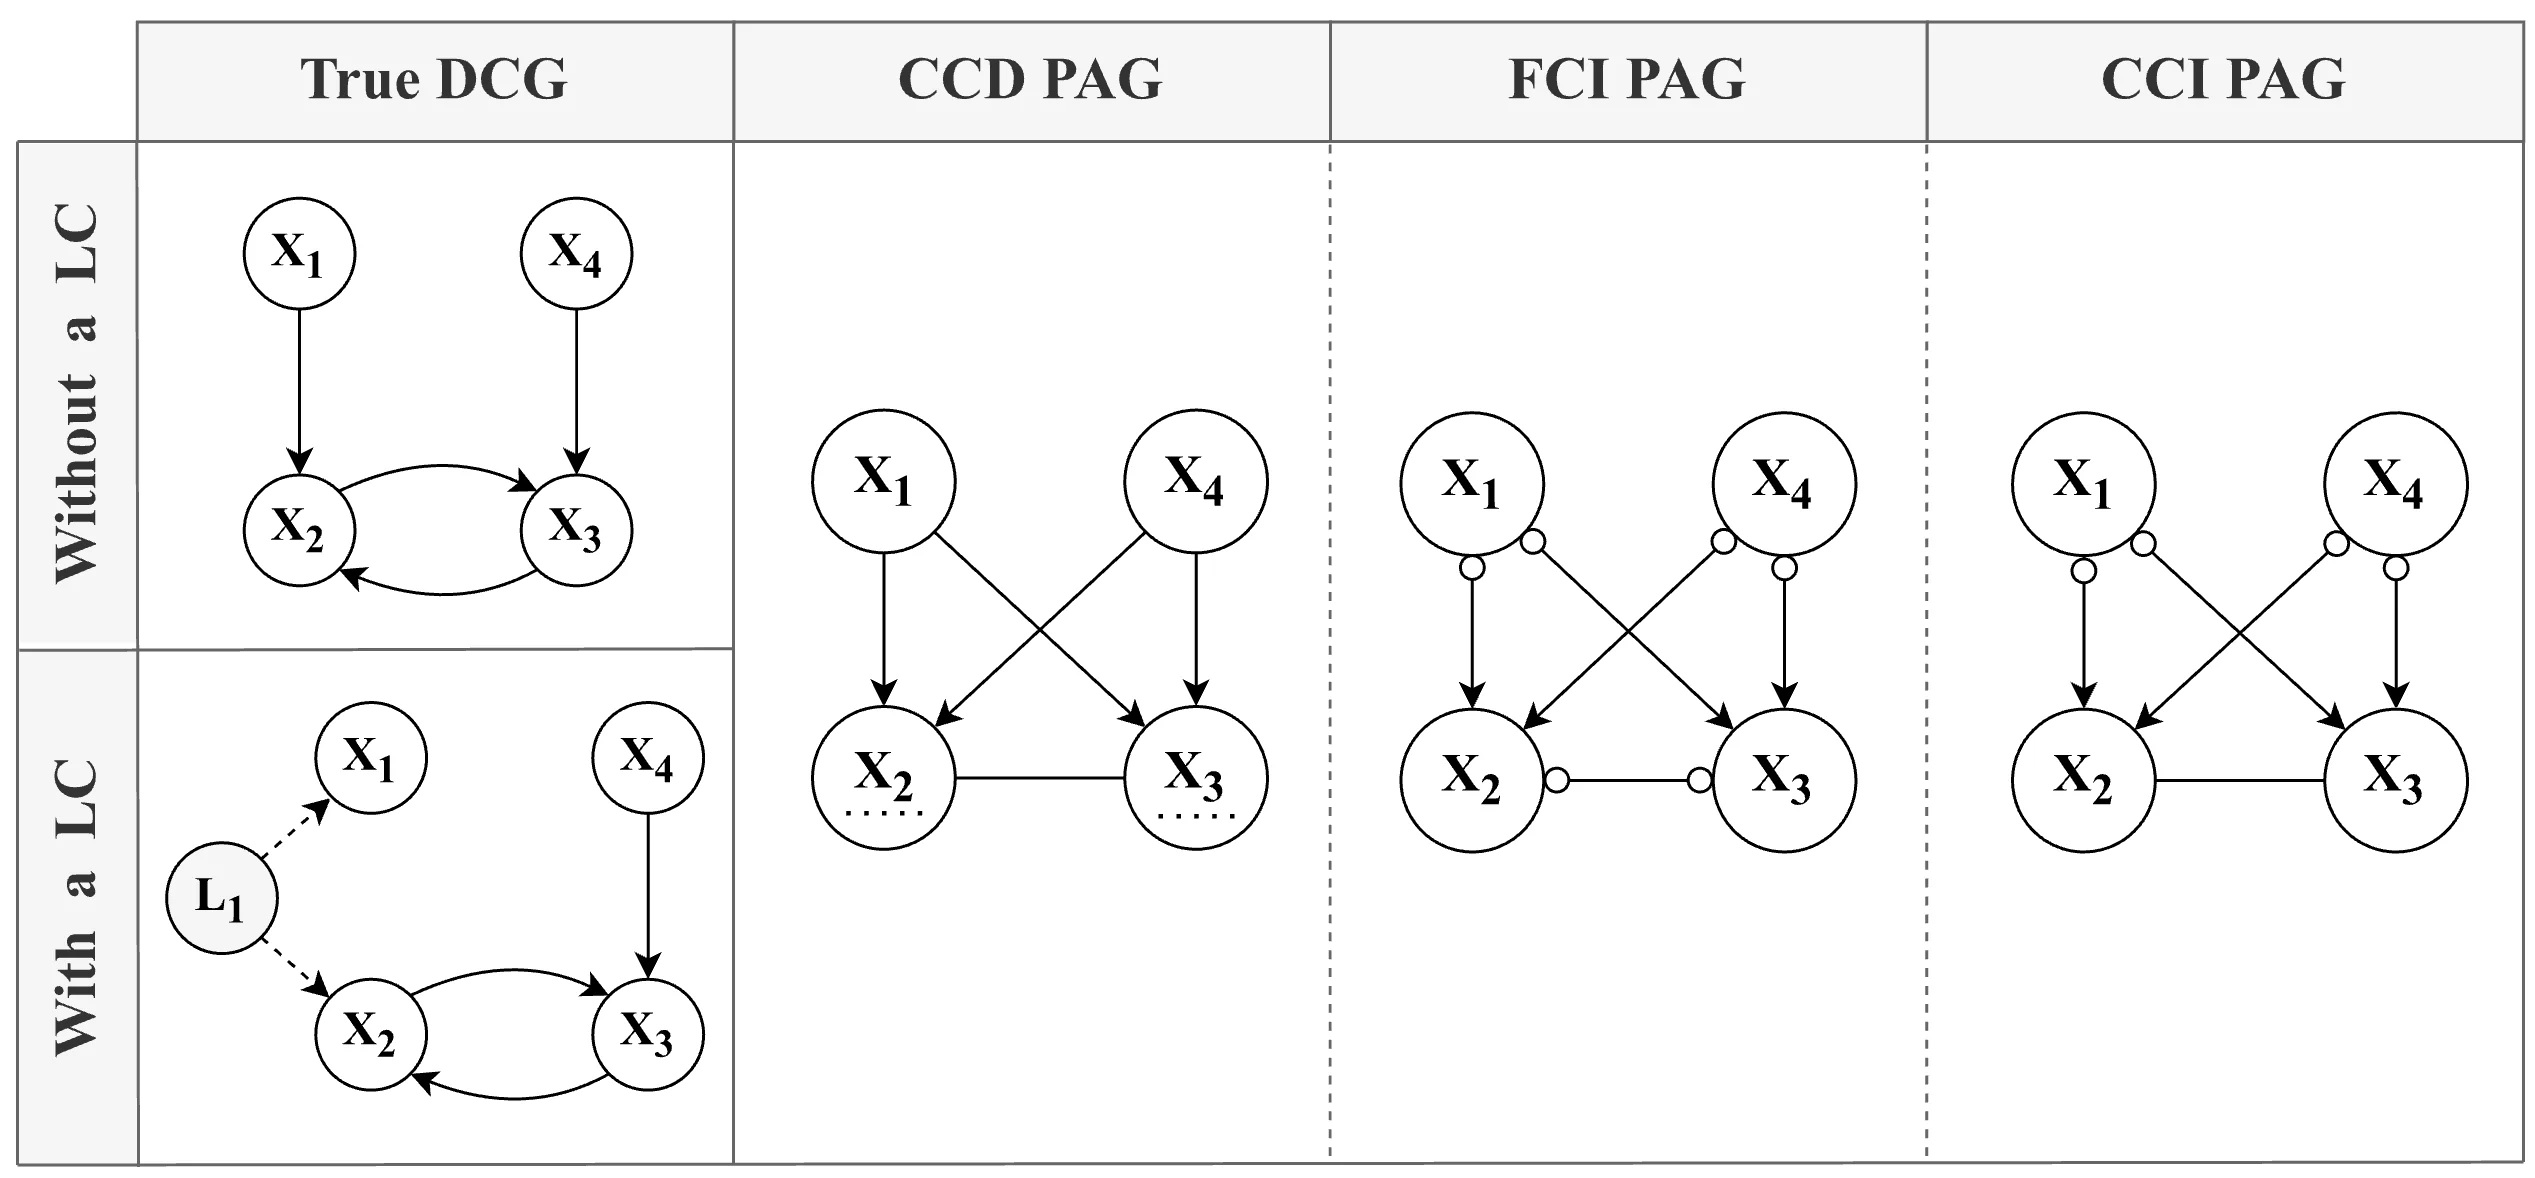 Comparative diagram of partial ancestral graphs (PAGs) in different causal models.